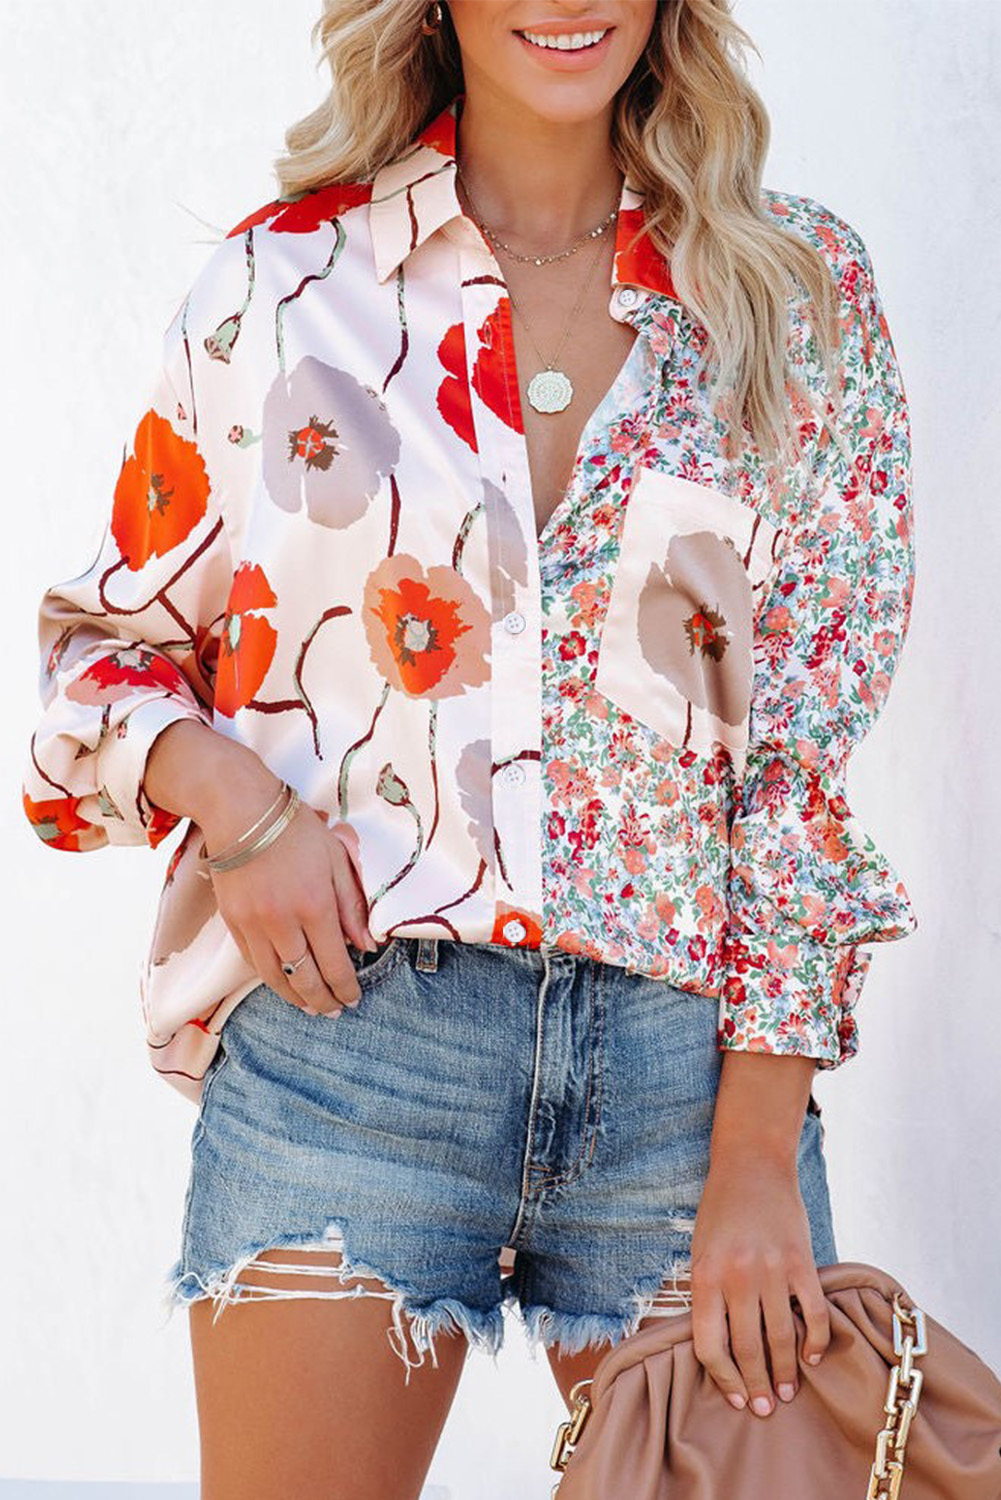 Shewin Wholesale Clothes Red Bohemian Floral Pockets Patchwork Button Up SHIRT